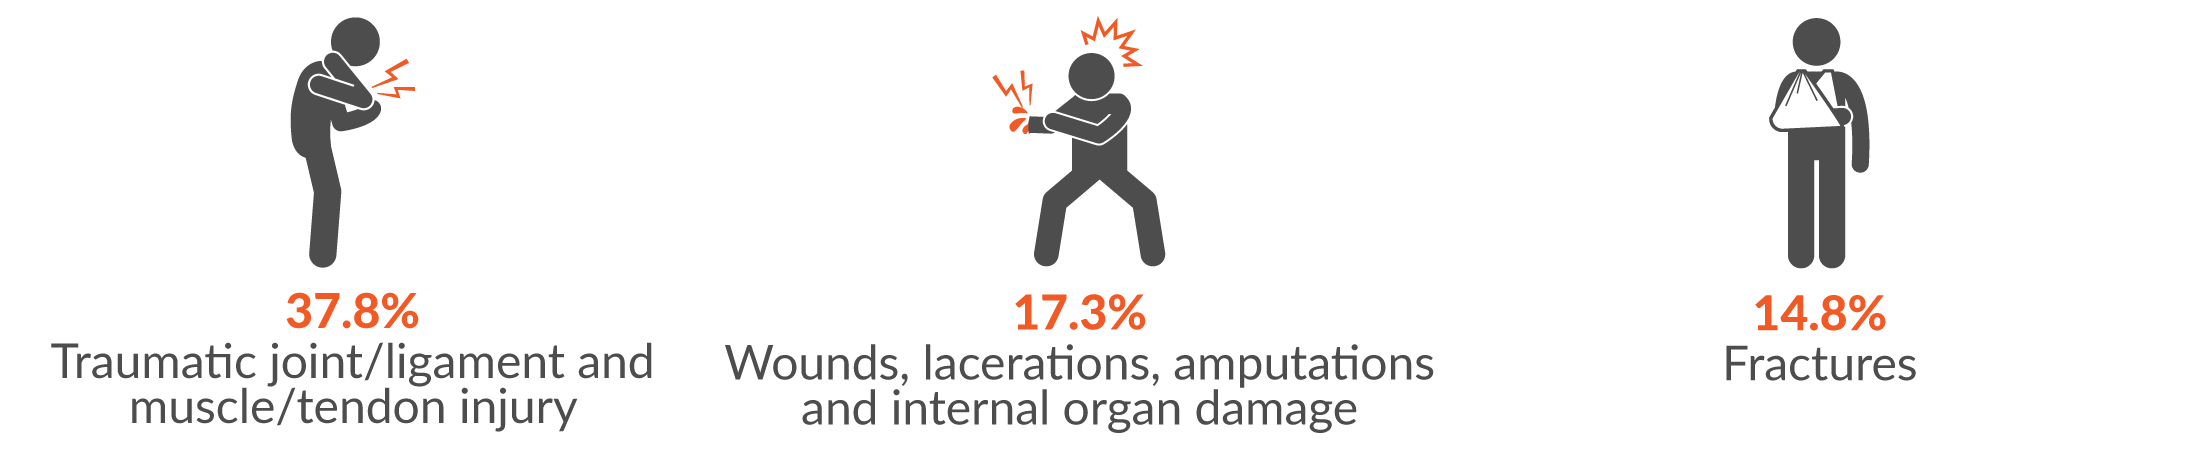 This infographic shows the main three injury groups for serious injuries were 37.8% traumatic joint/ligament and muscle/tendon injury; 17.3% wounds, lacerations, amputations and internal organ damage; and 14.8% fractures.